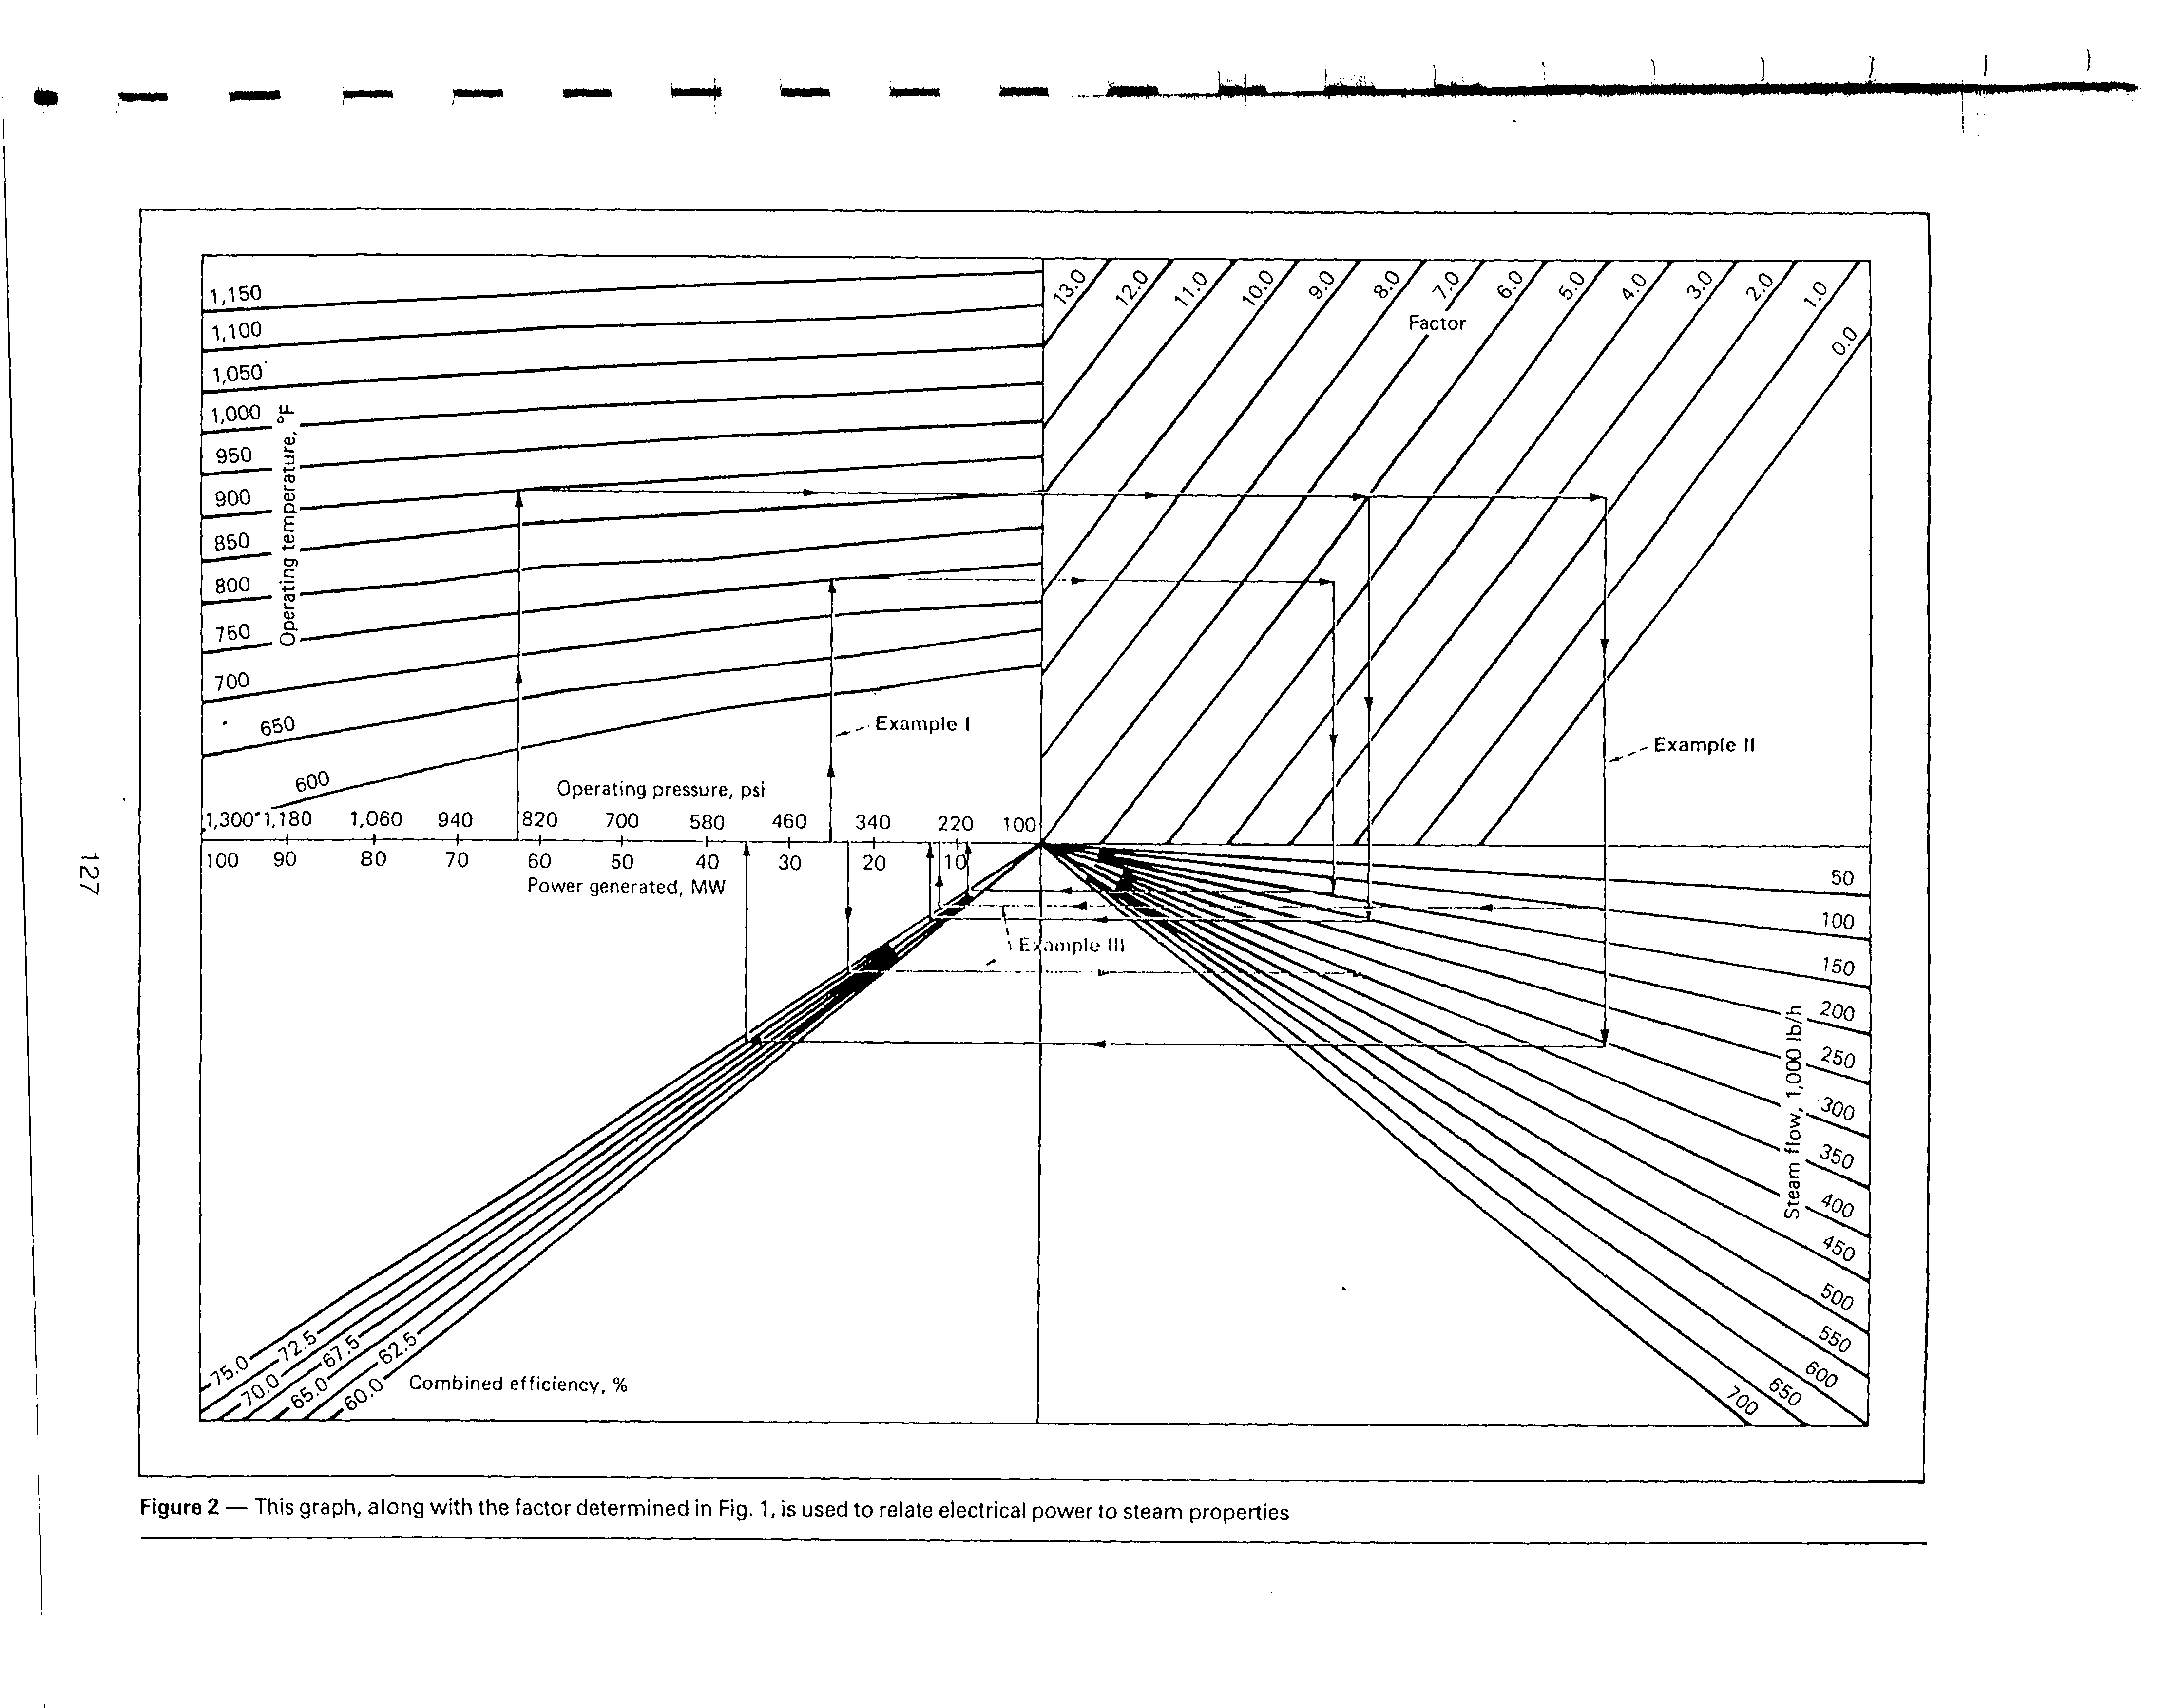 Figure 2 — This graph, along with the factor determined in Fig. 1, is used to relate electrical power to steam properties...